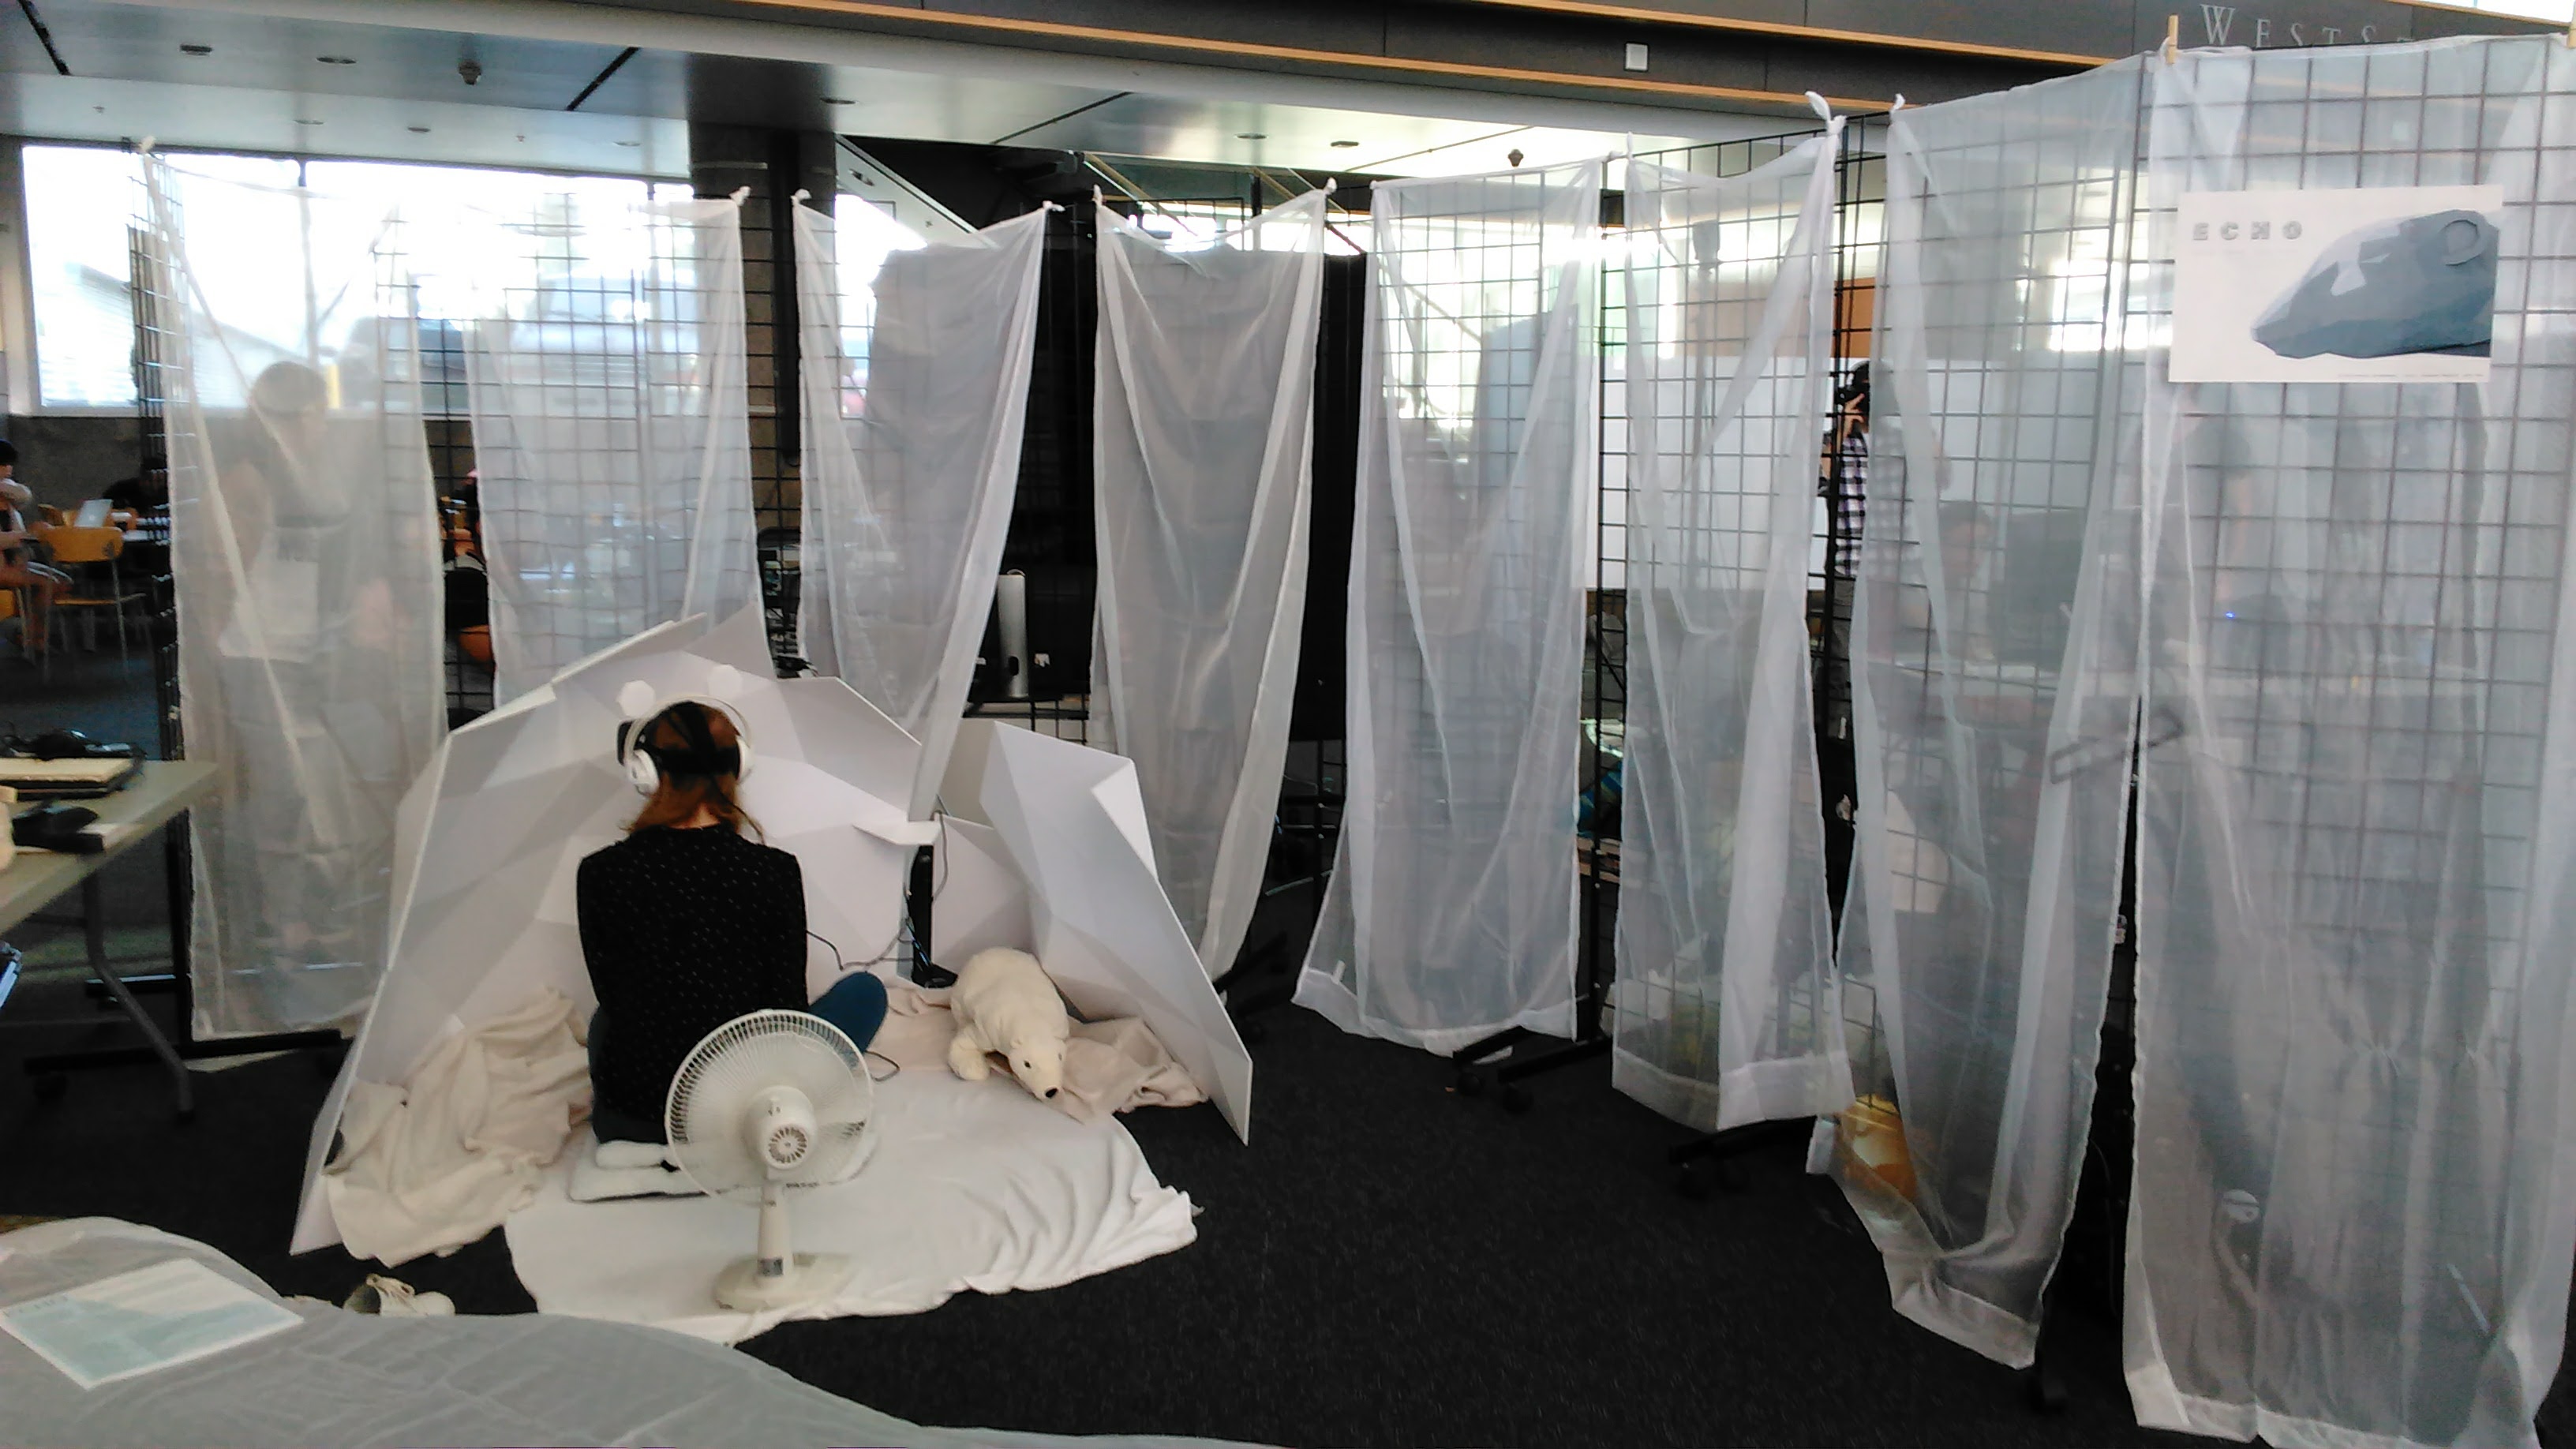 A photograph of Echo's physical installation at the SFU Mezzanine, showing a lady sitting on a white cloth inside a low-poly cave, facing away from the camera, surrounded by grid frames covered in white and transparent fabric